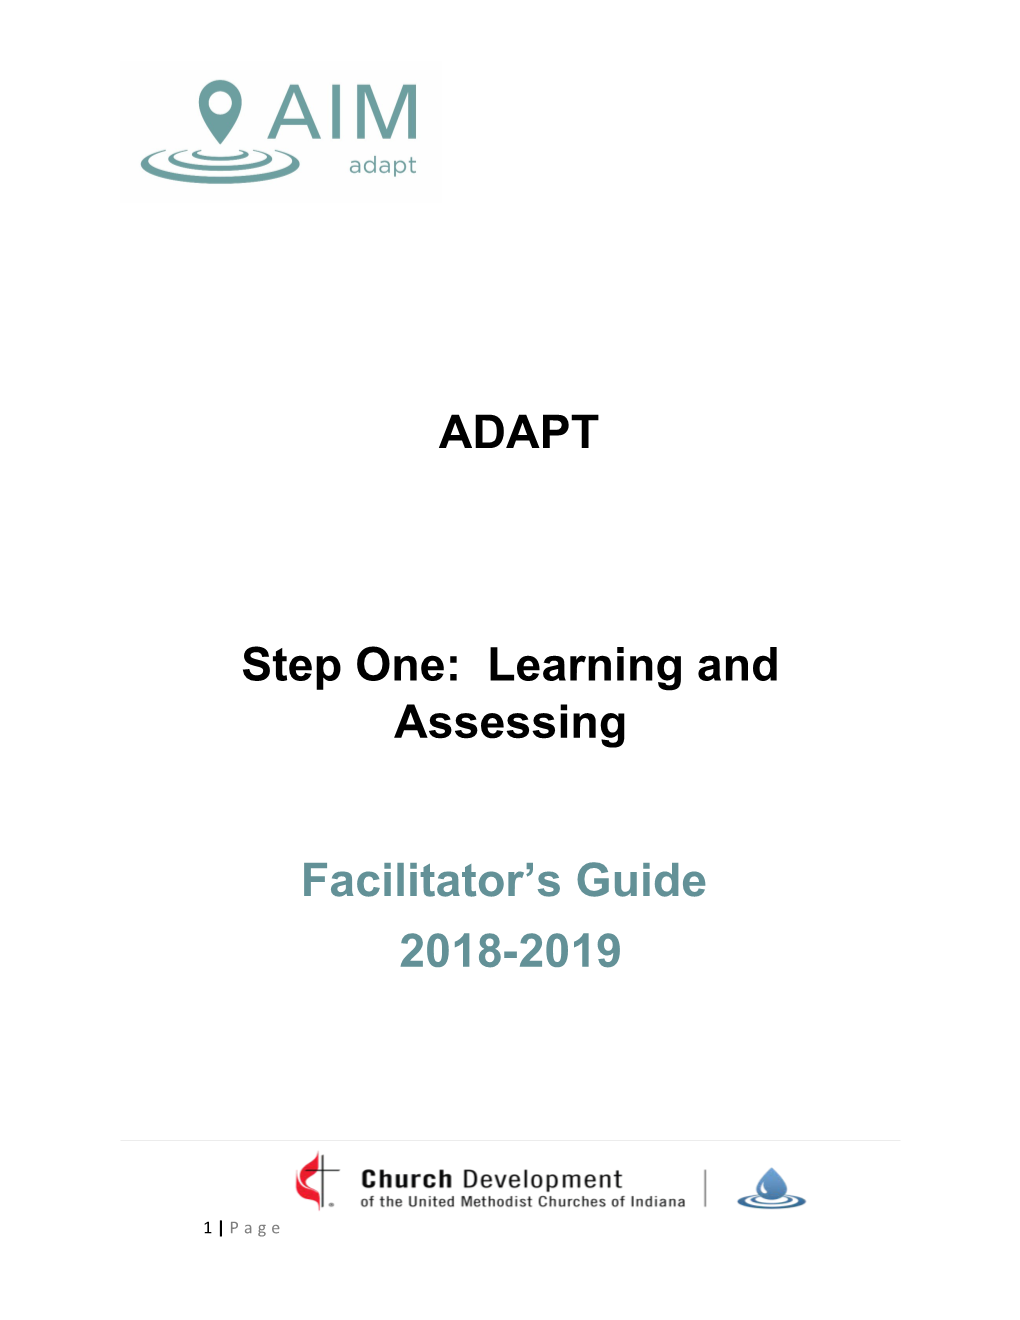 Step One: Learning and Assessing